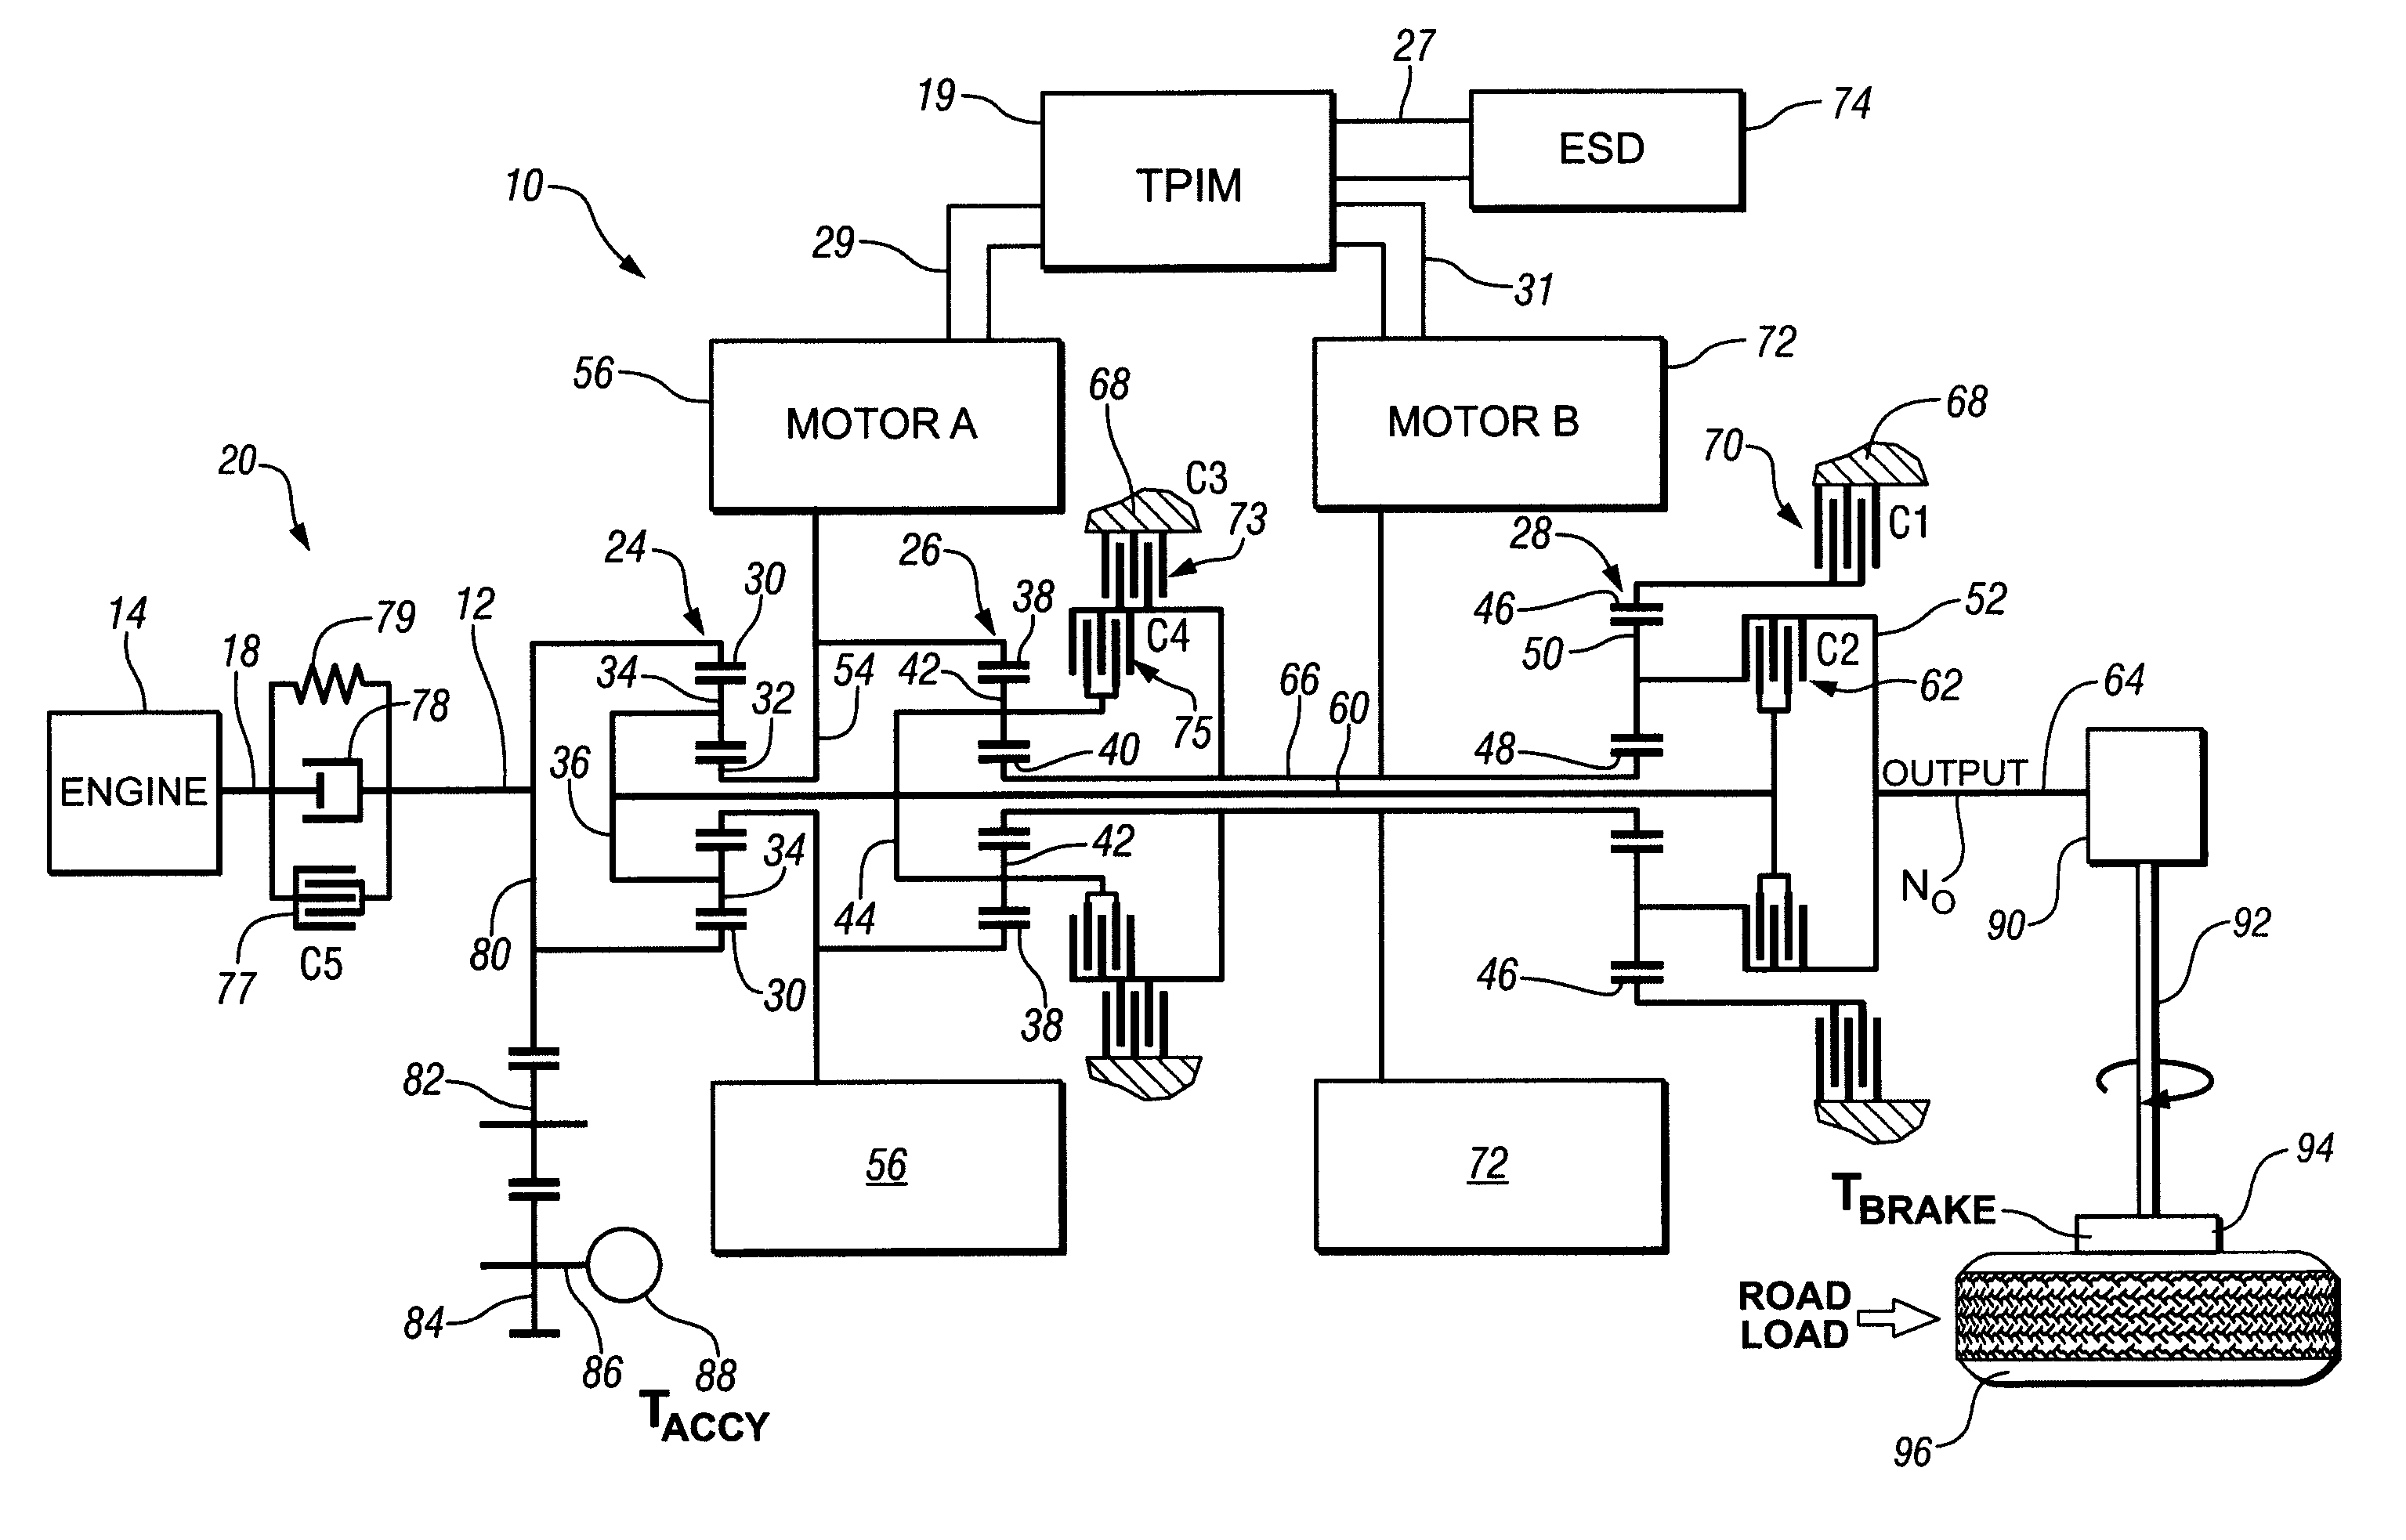 Control system architecture for a hybrid powertrain